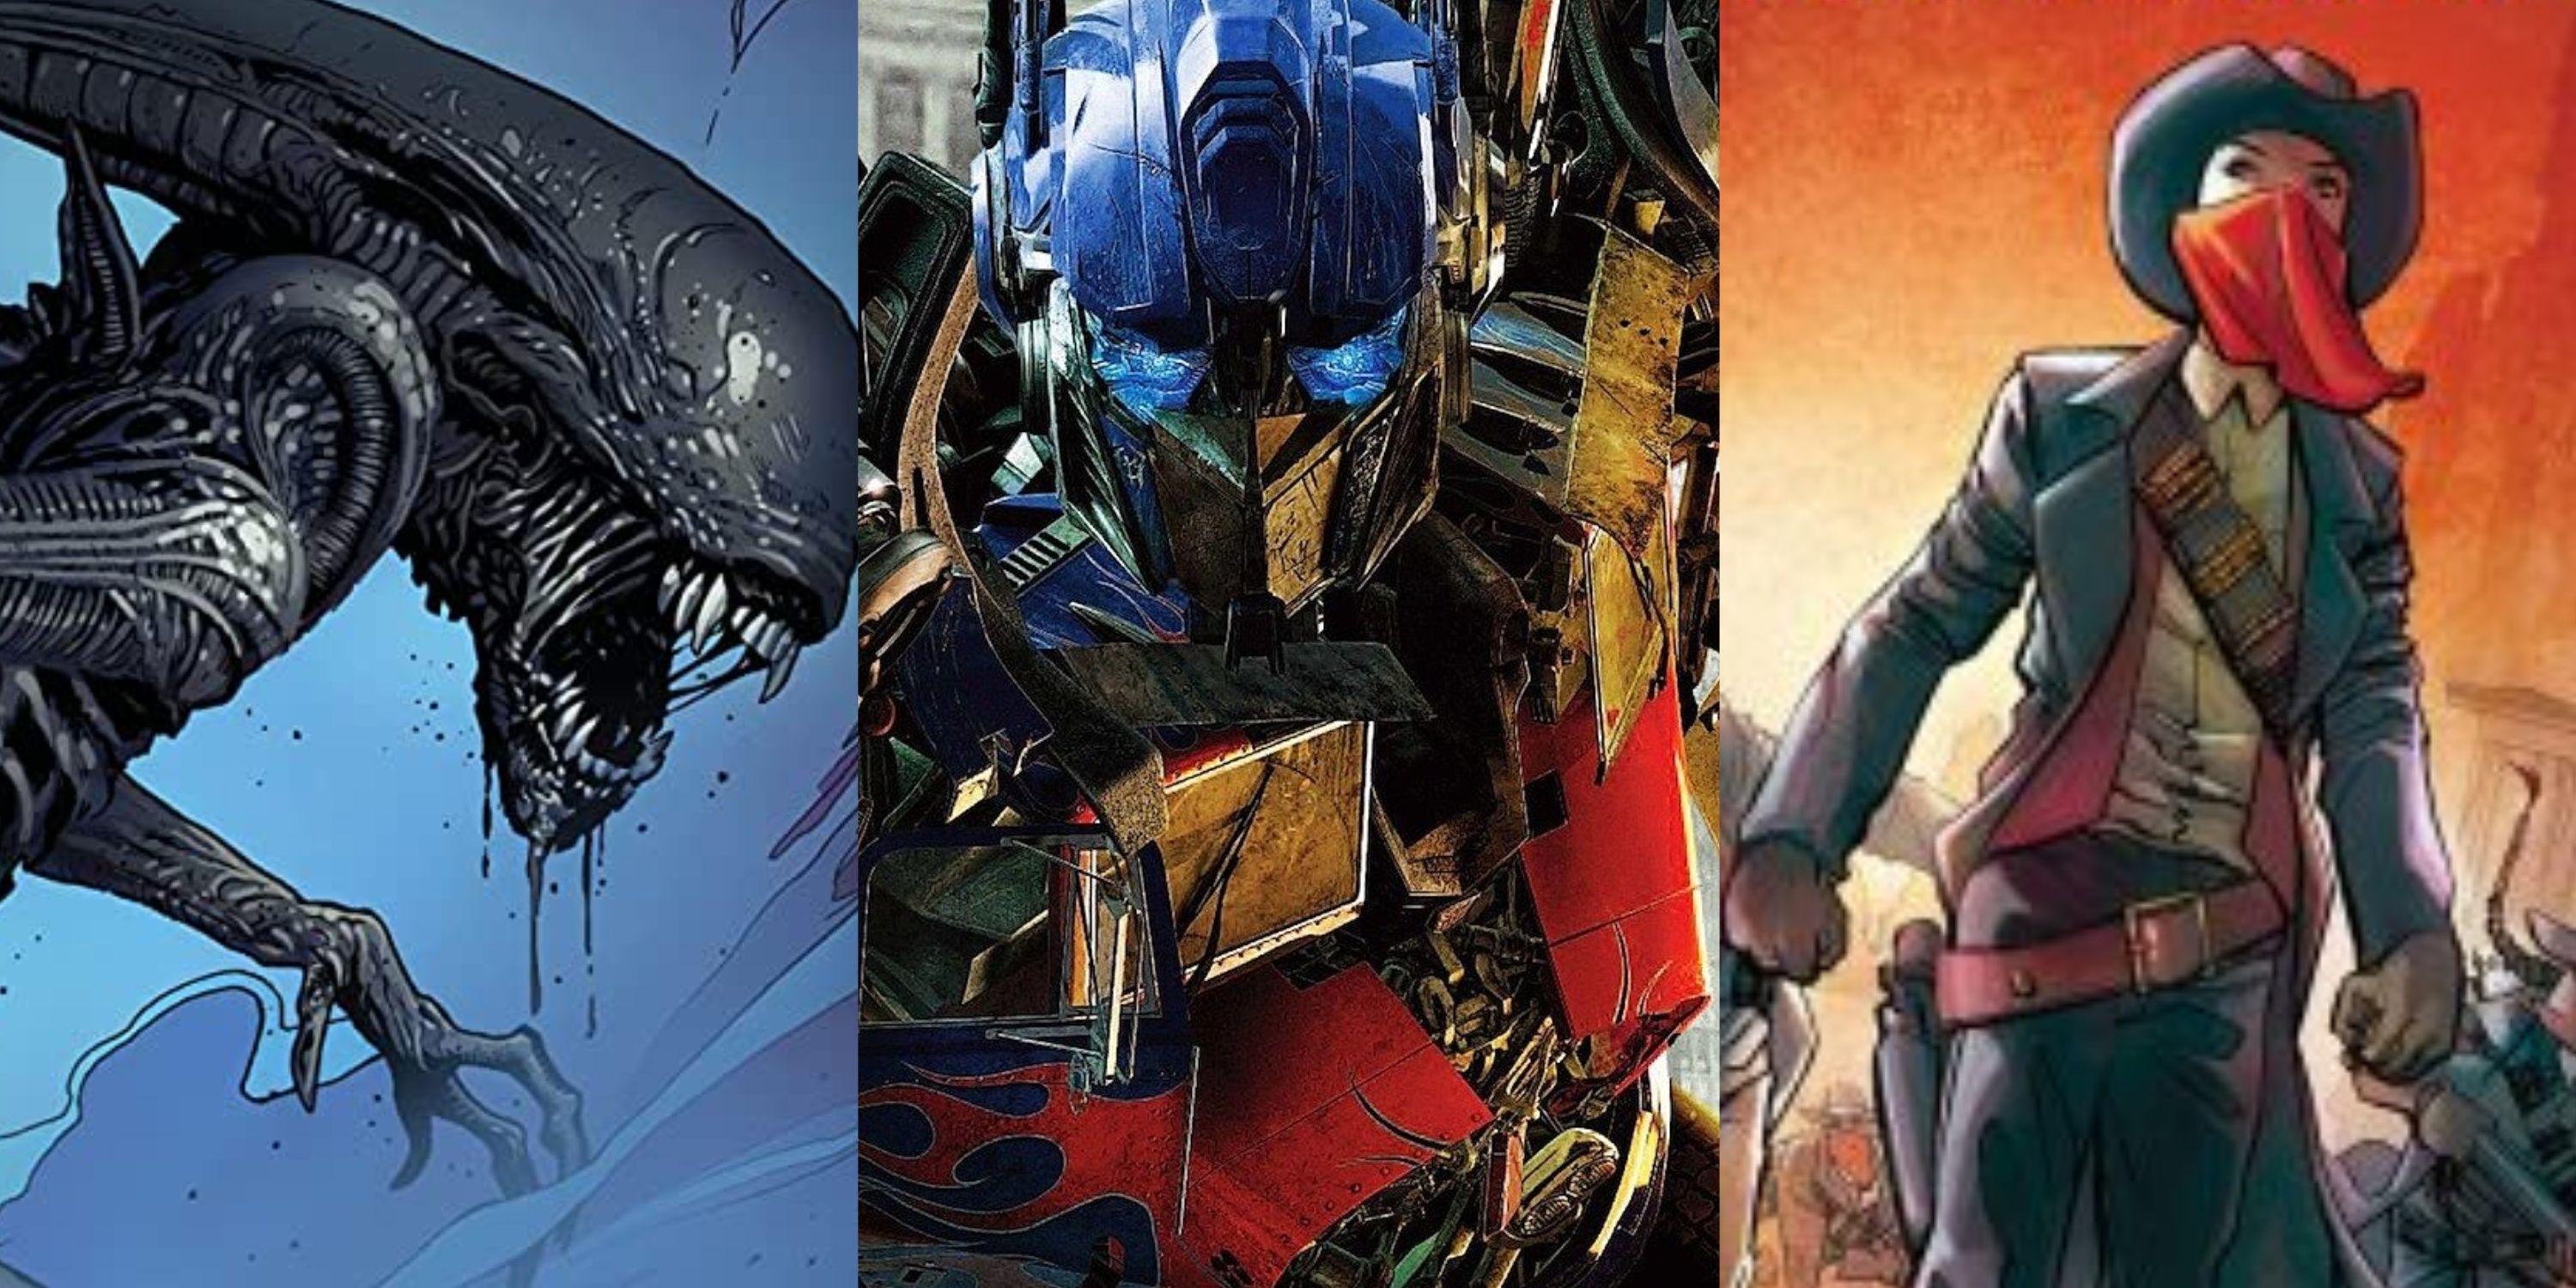 Split image of Alien, Optimus Prime from Transformers films and Big Thunder Mountain comic